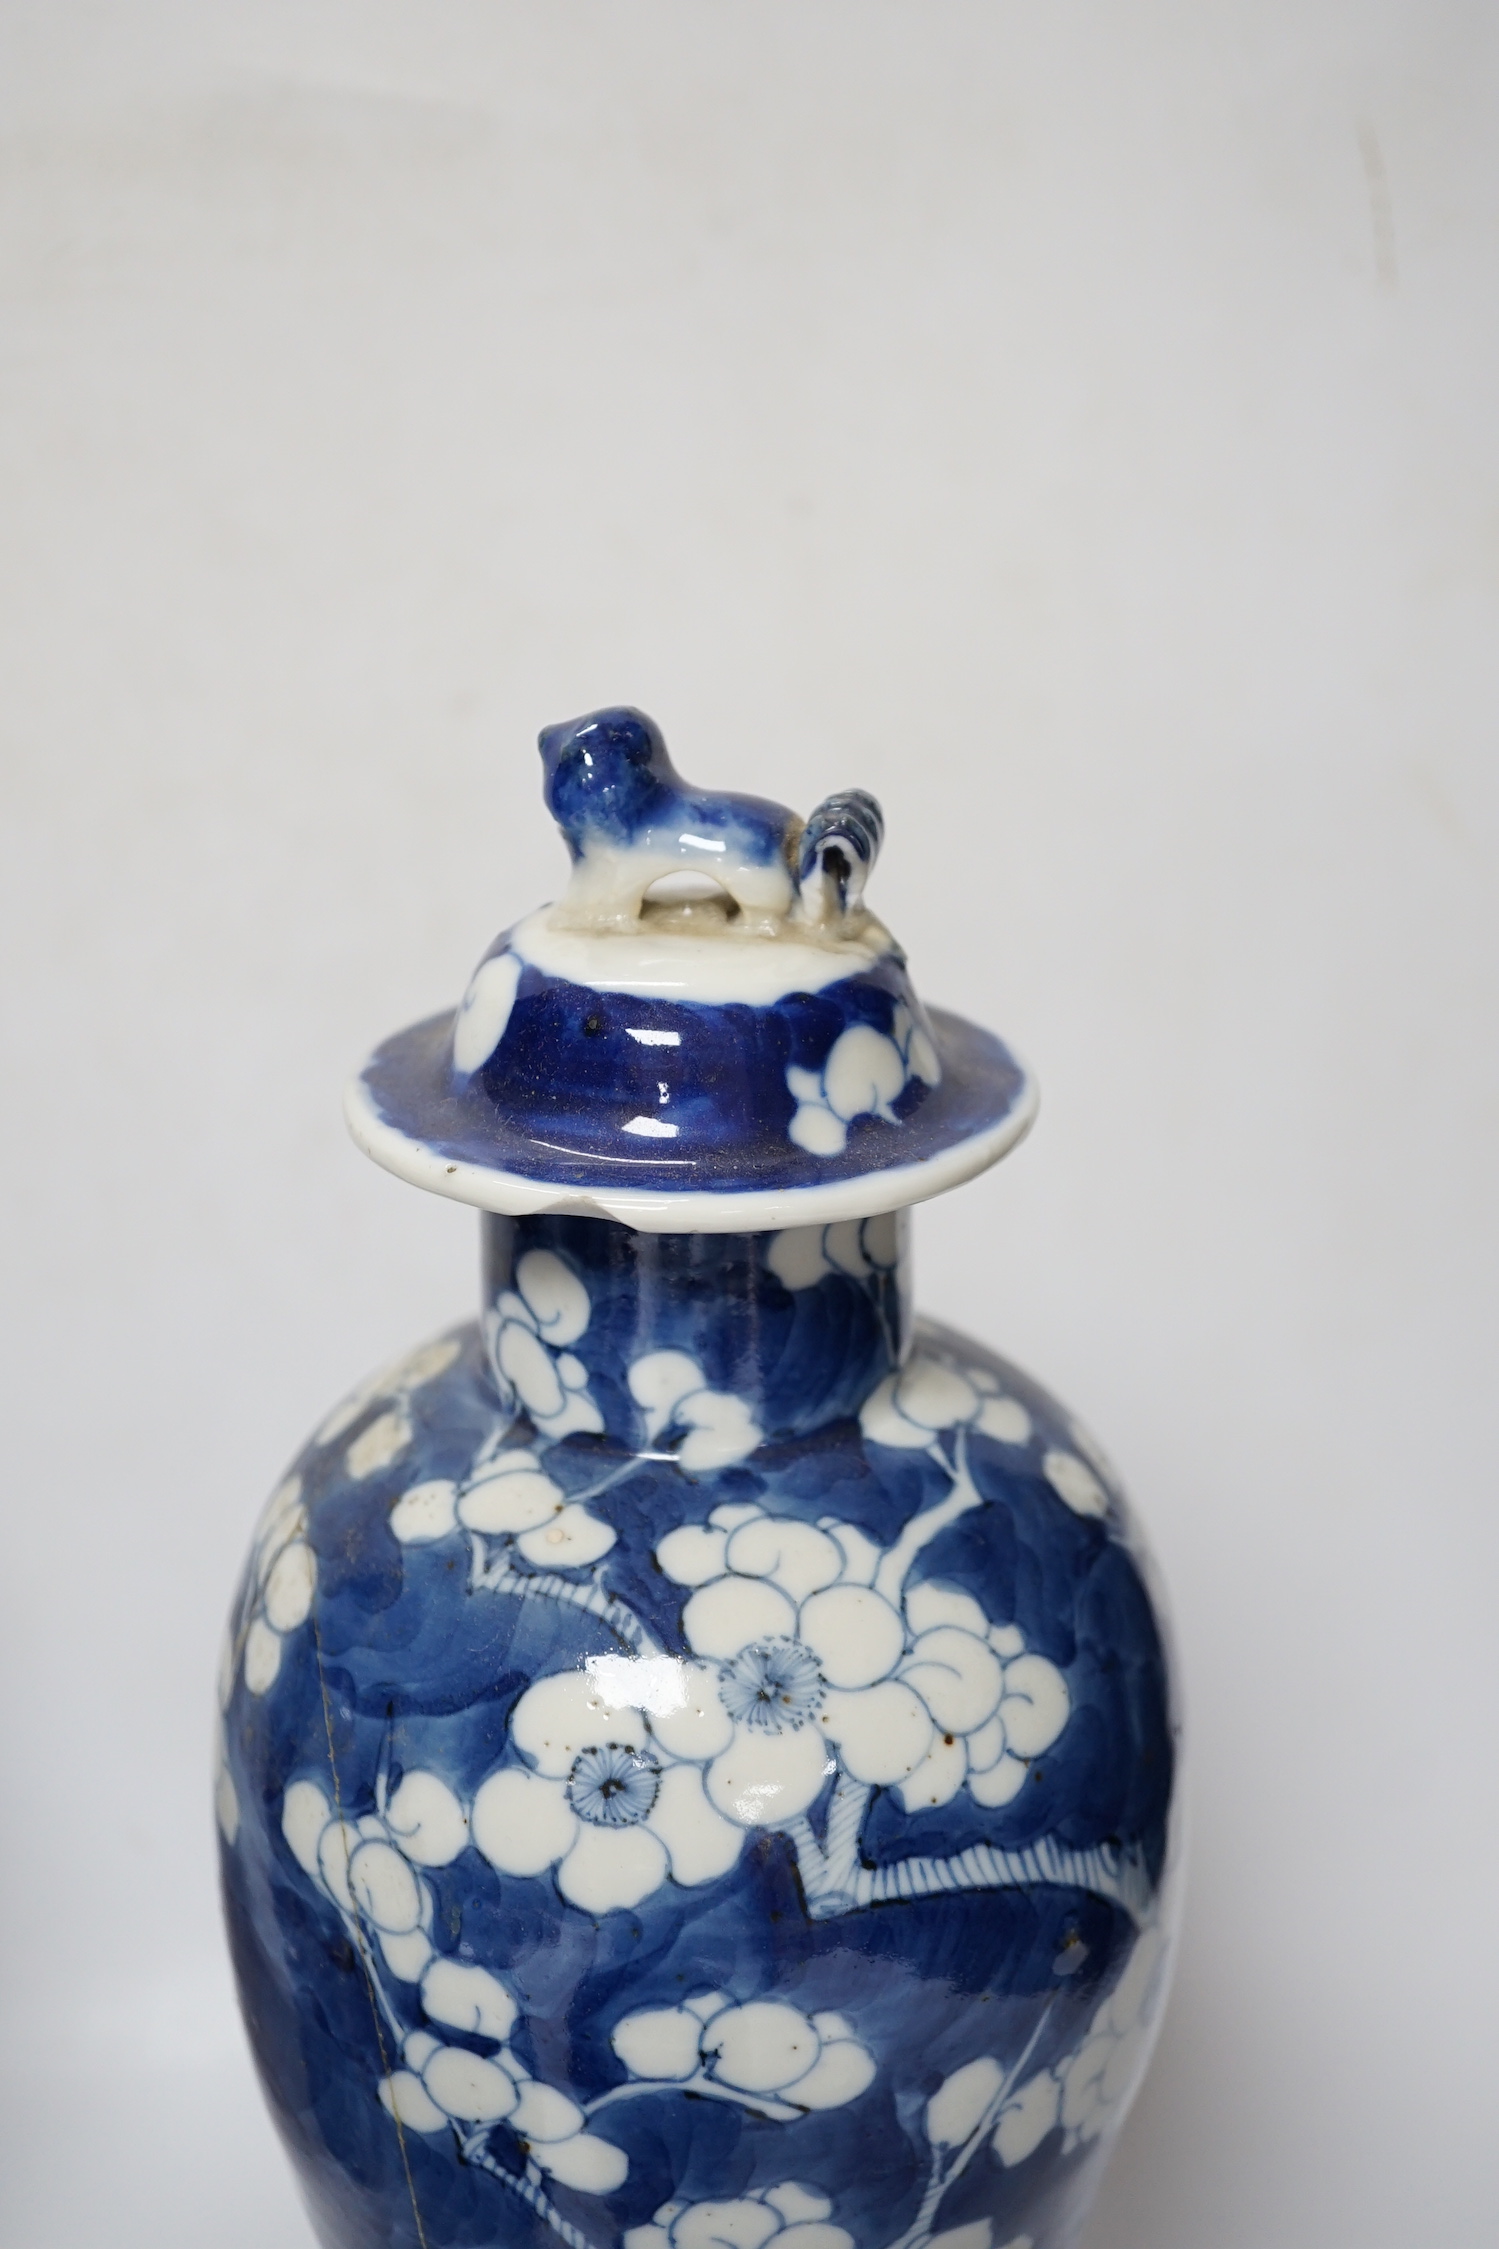 Five early 20th century Chinese blue and white prunus vases and covers, tallest 31cm